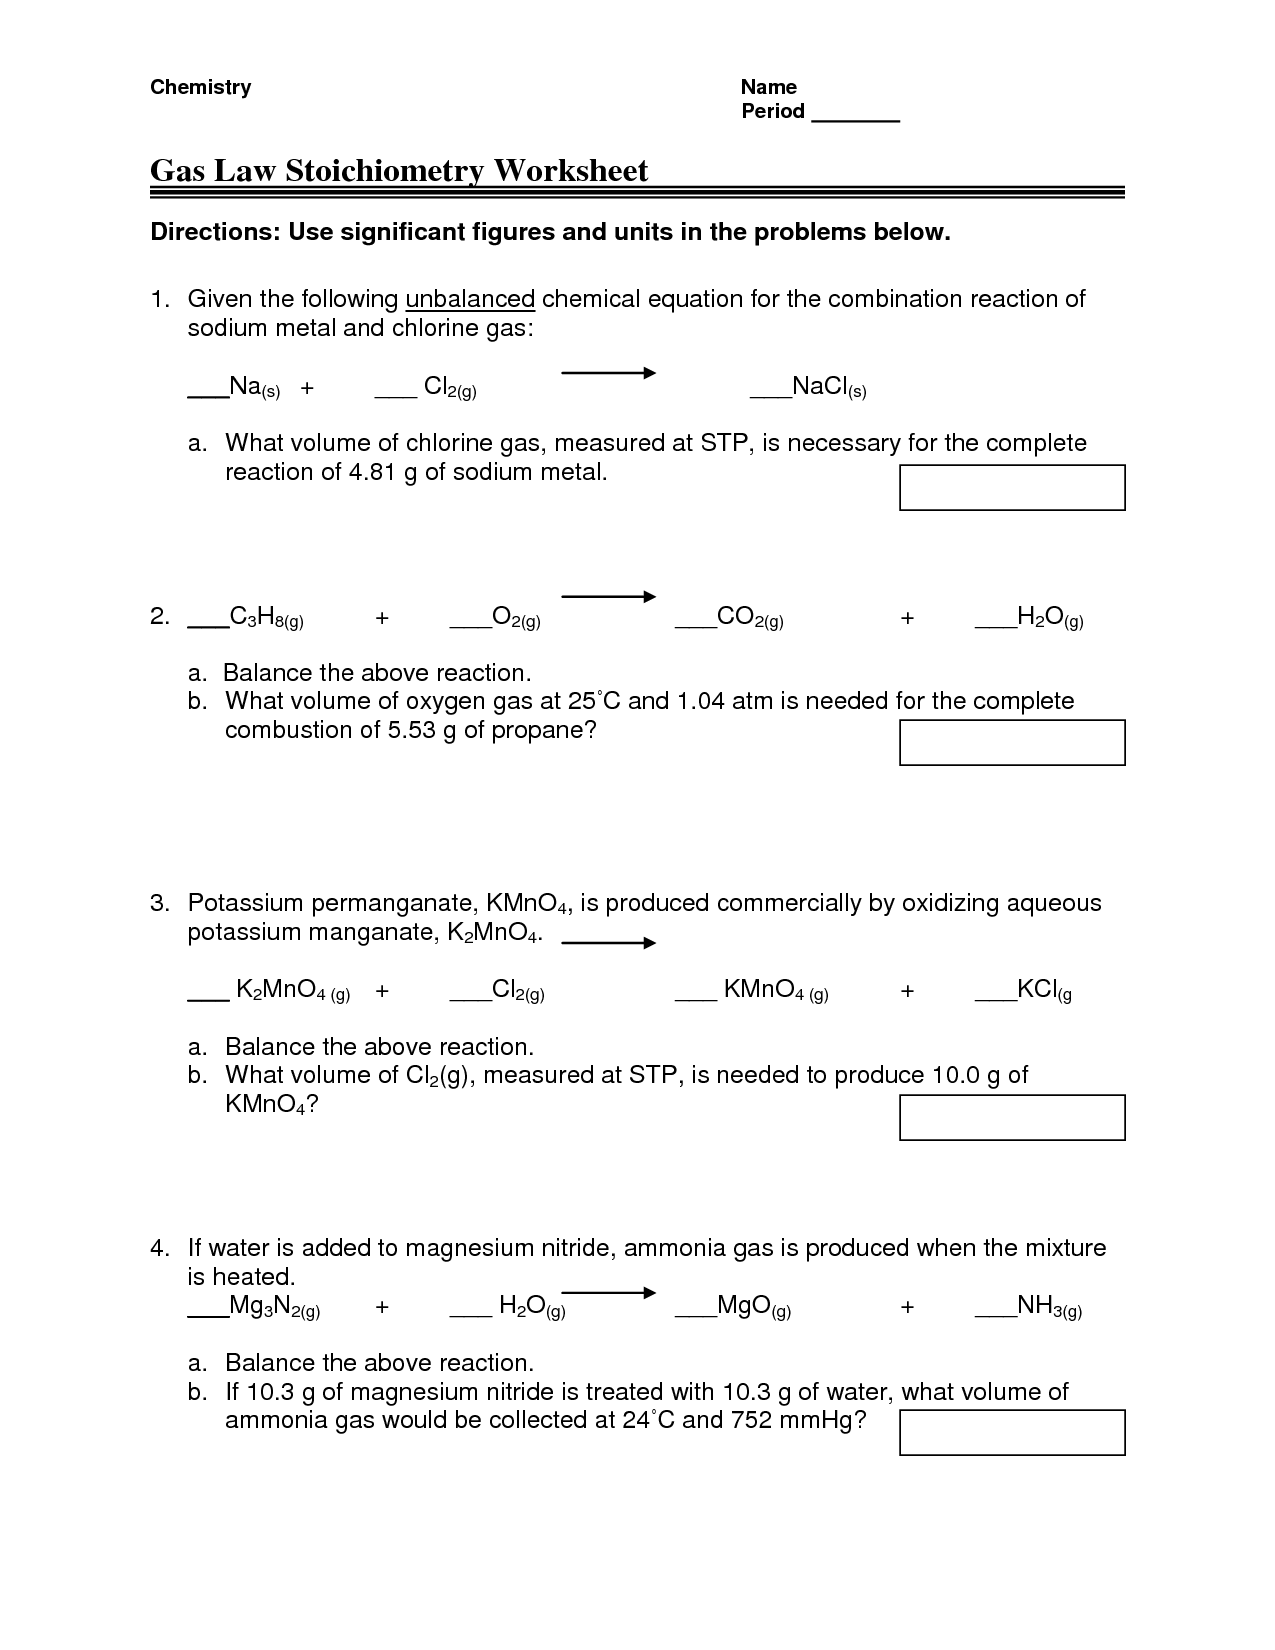 Gas Law Stoichiometry Worksheet Image